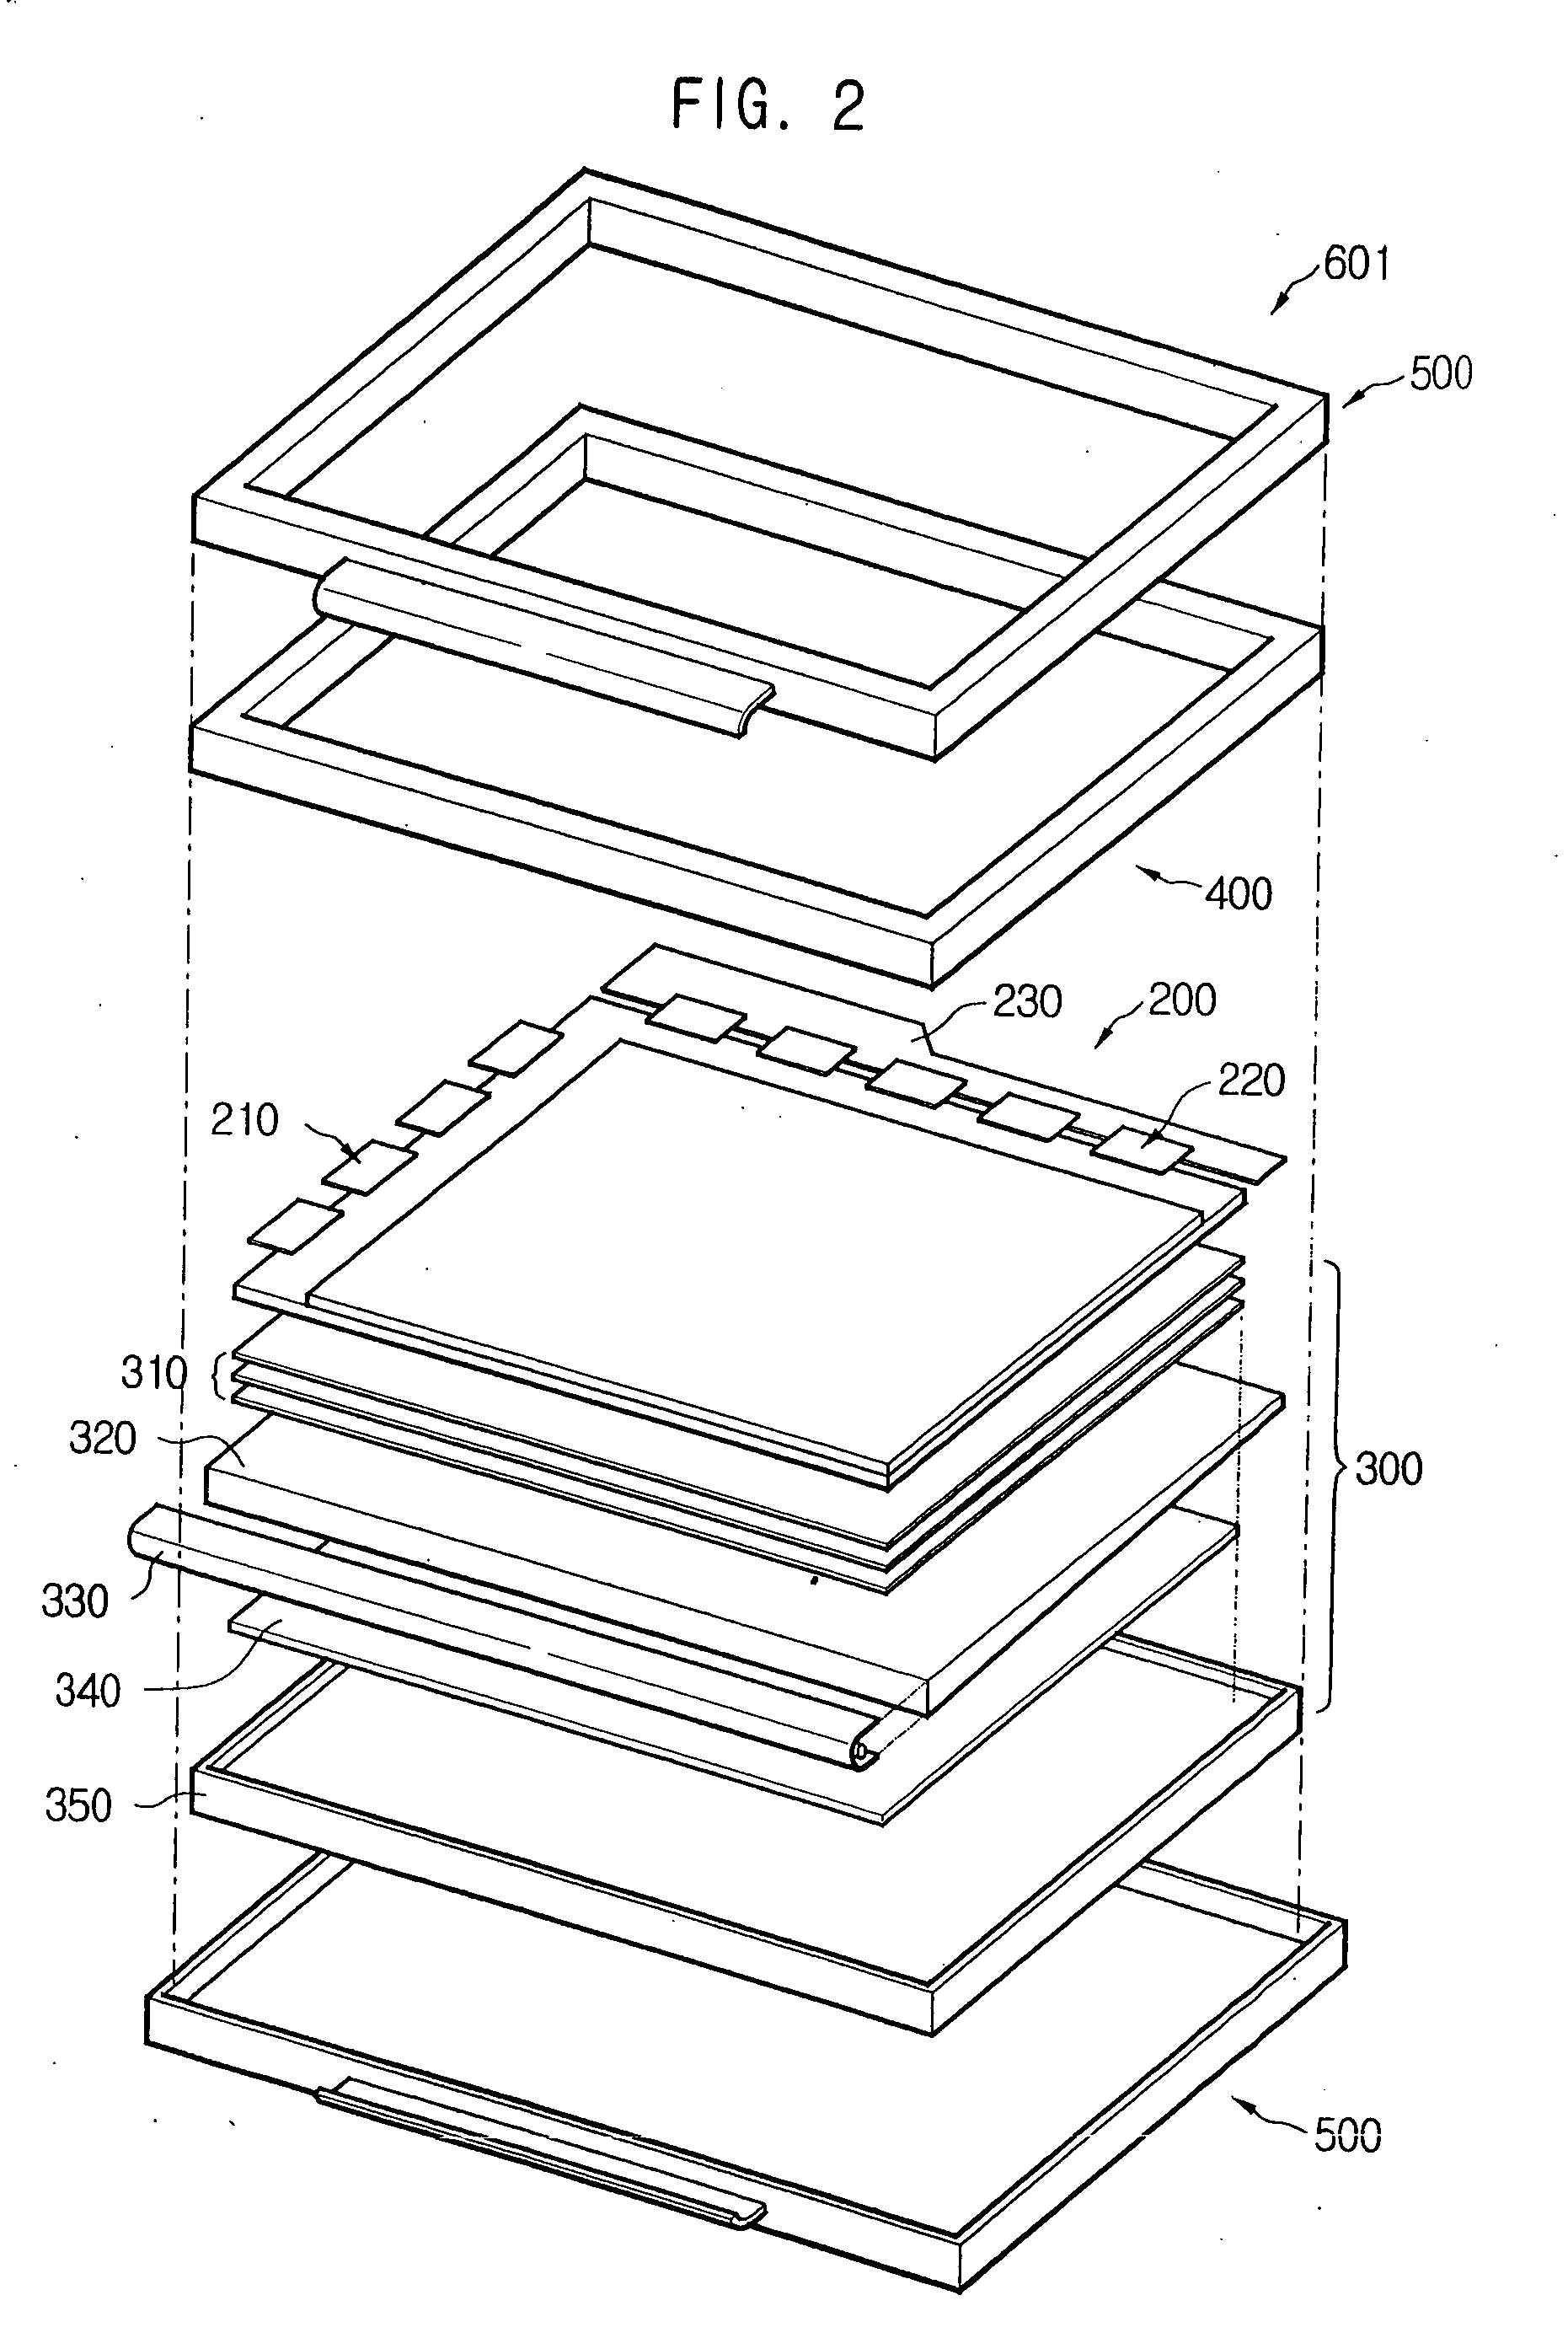 Display panel with signal transmission patterns